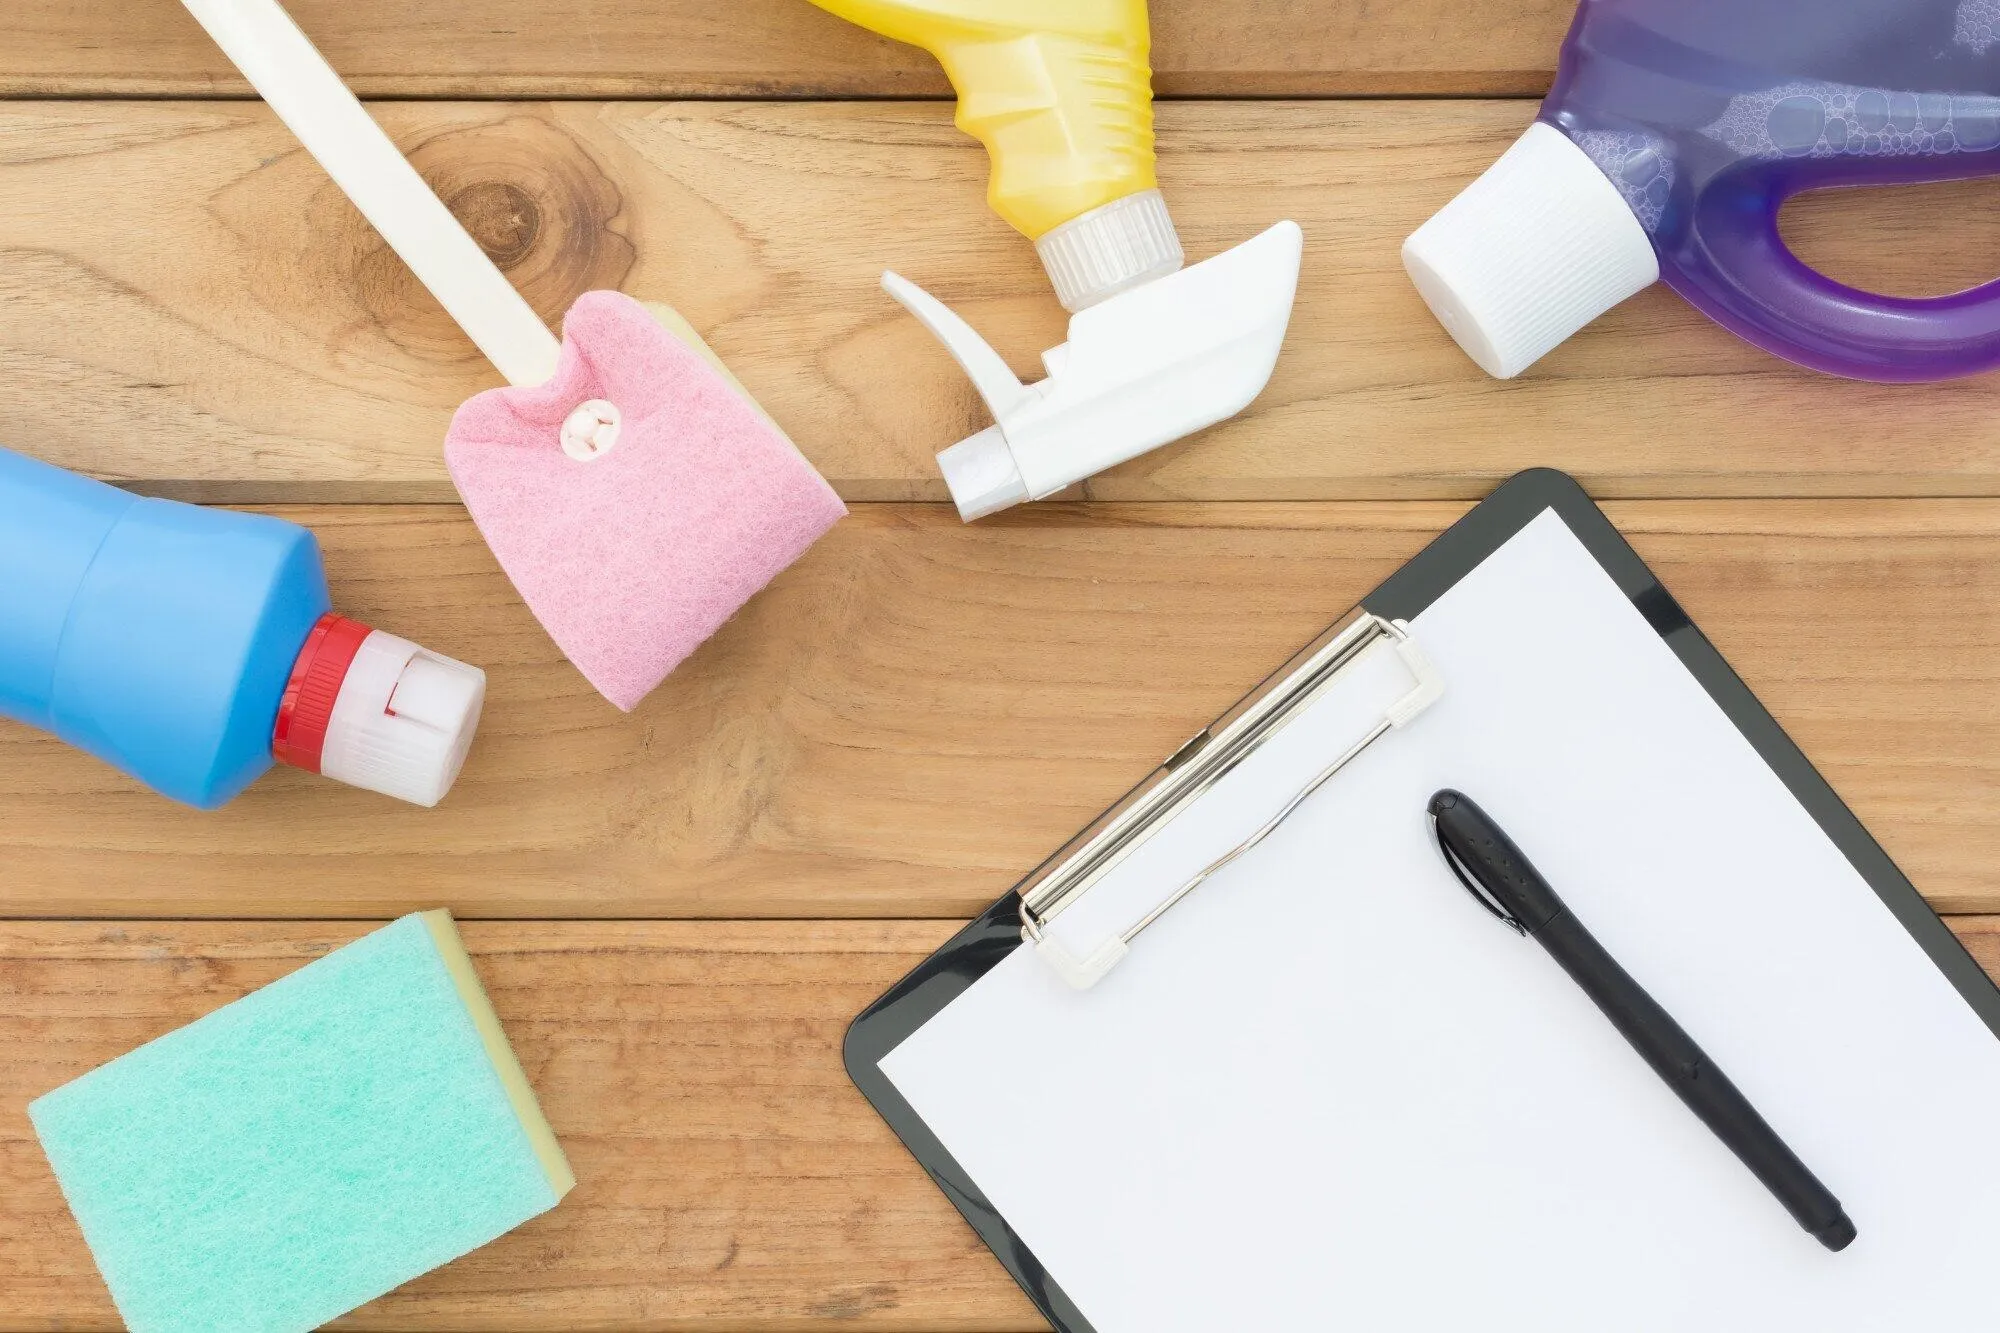 Don’t Overlook These Important Areas on Your Office Cleaning Checklist